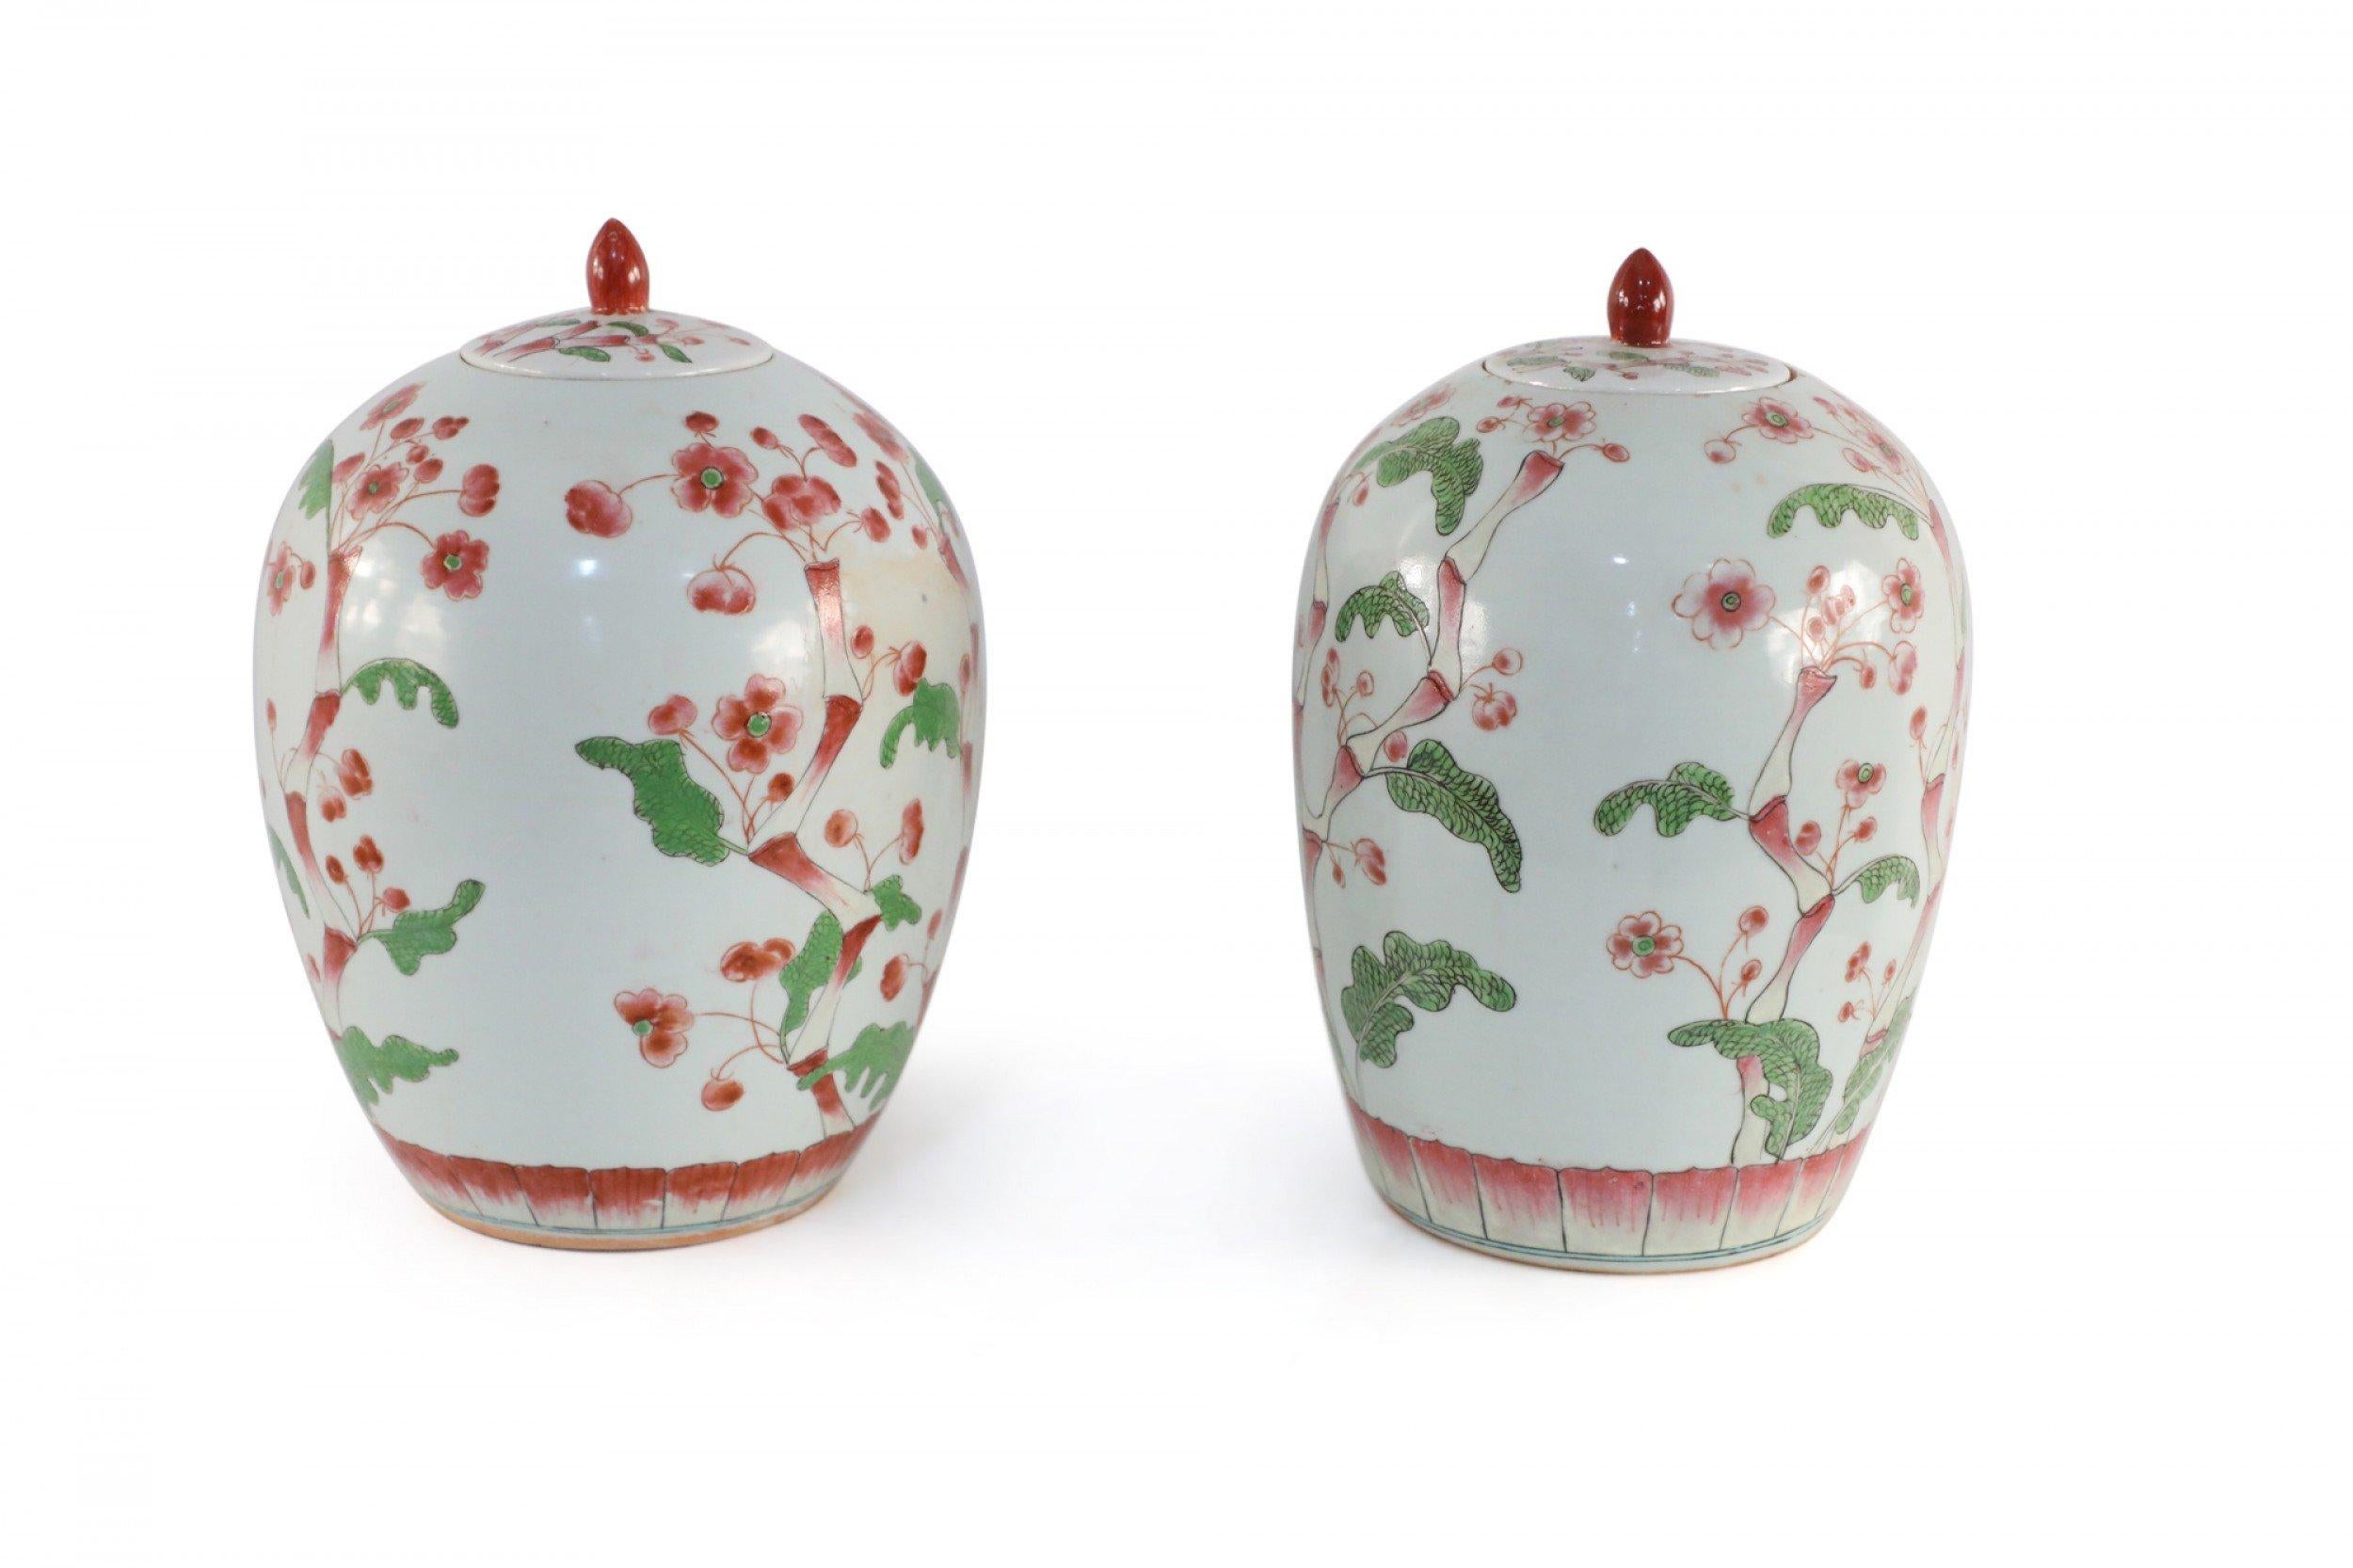 Pair of Chinese white porcelain urns decorated with dark pink and green-leafed cherry blossoms growing up the rounded forms, finished with red-finial topped lids and made with holes in the bases (priced as pair).
      